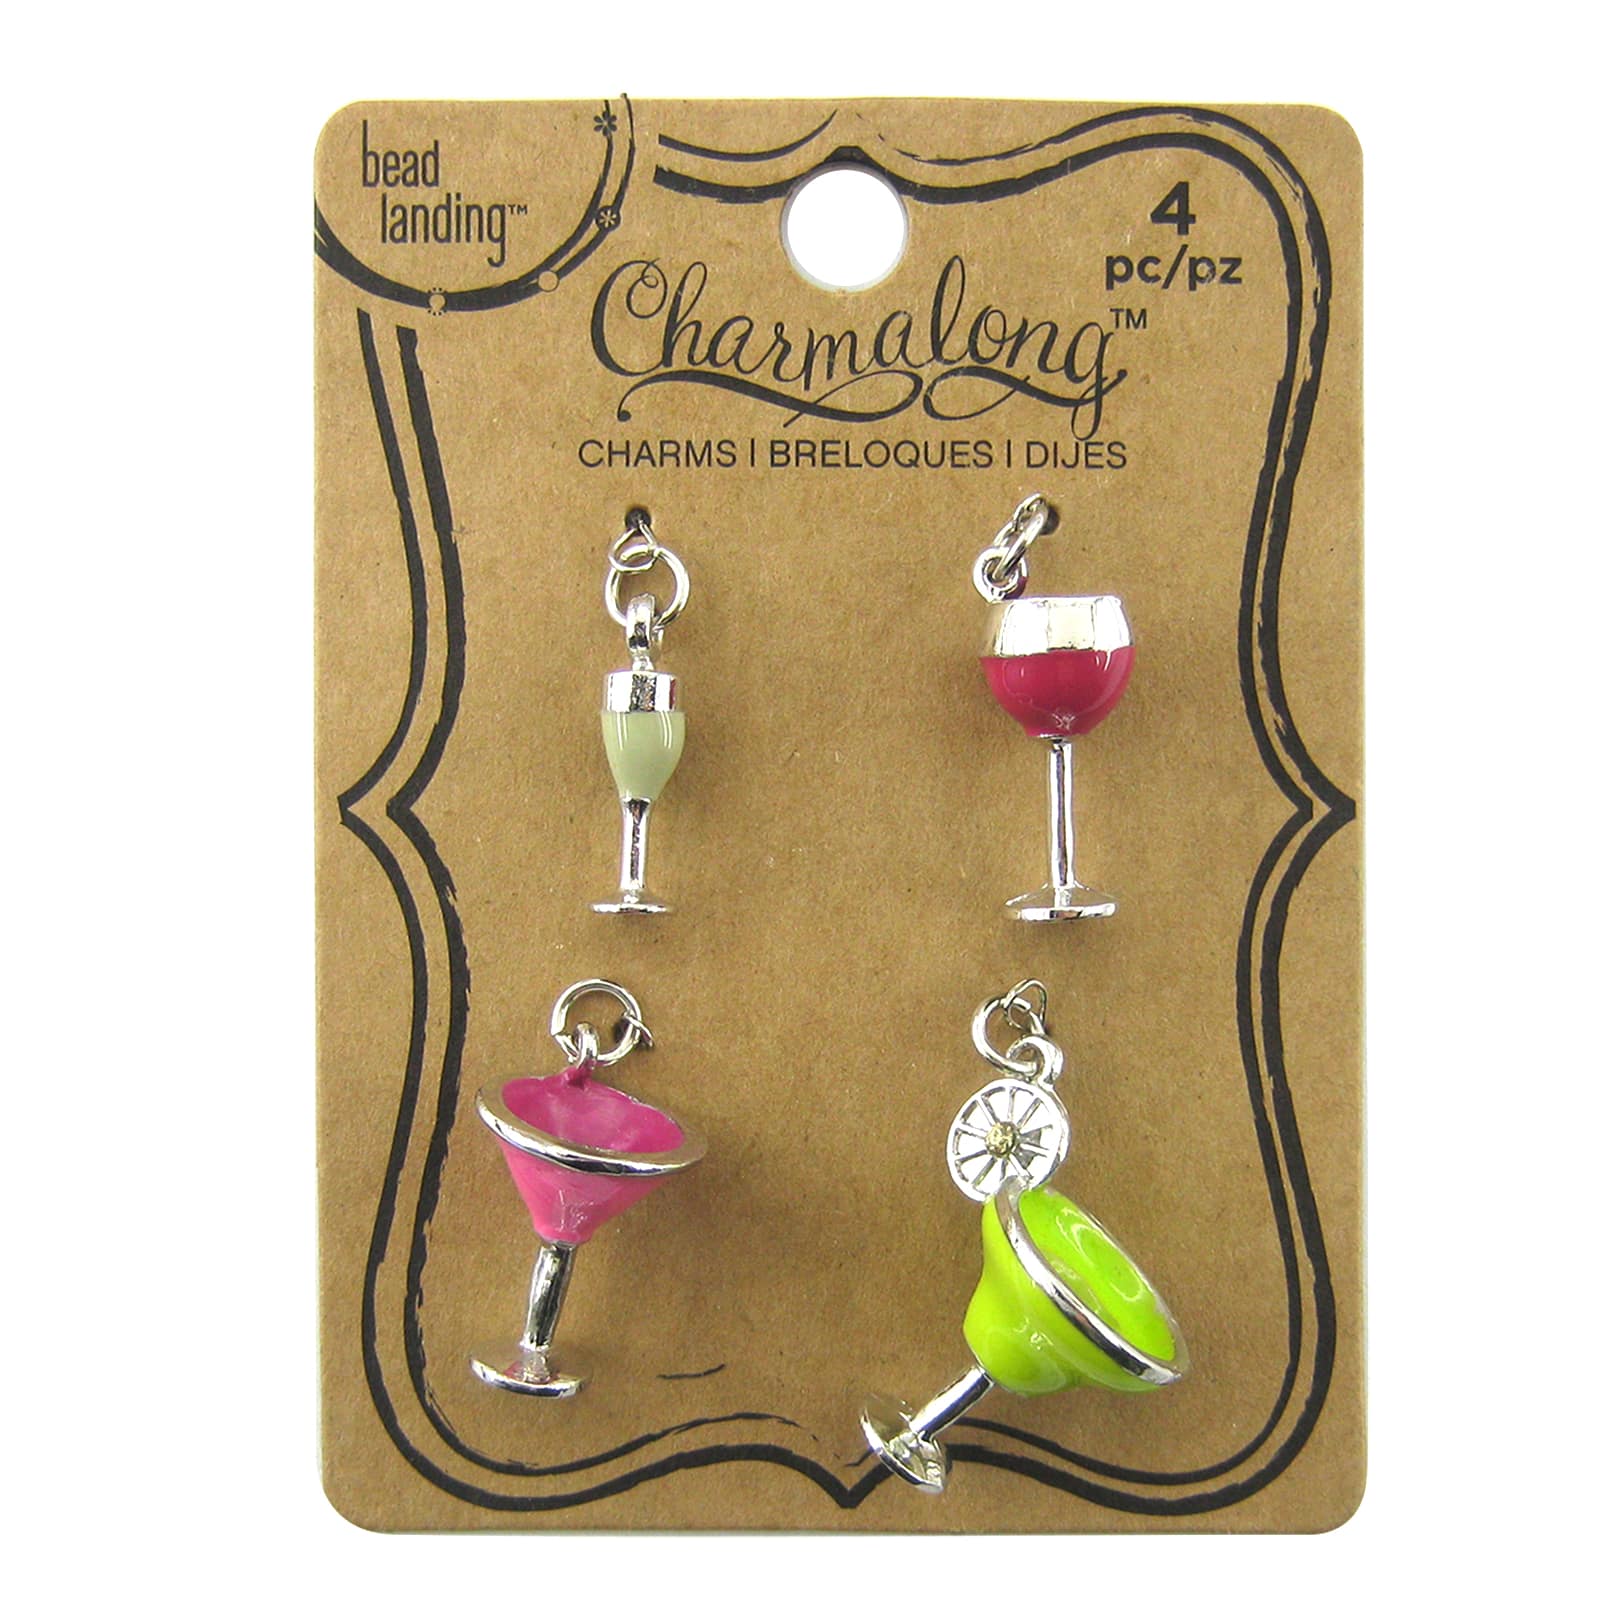 Charmalong&#x2122; Cocktail Charms by Bead Landing&#x2122;